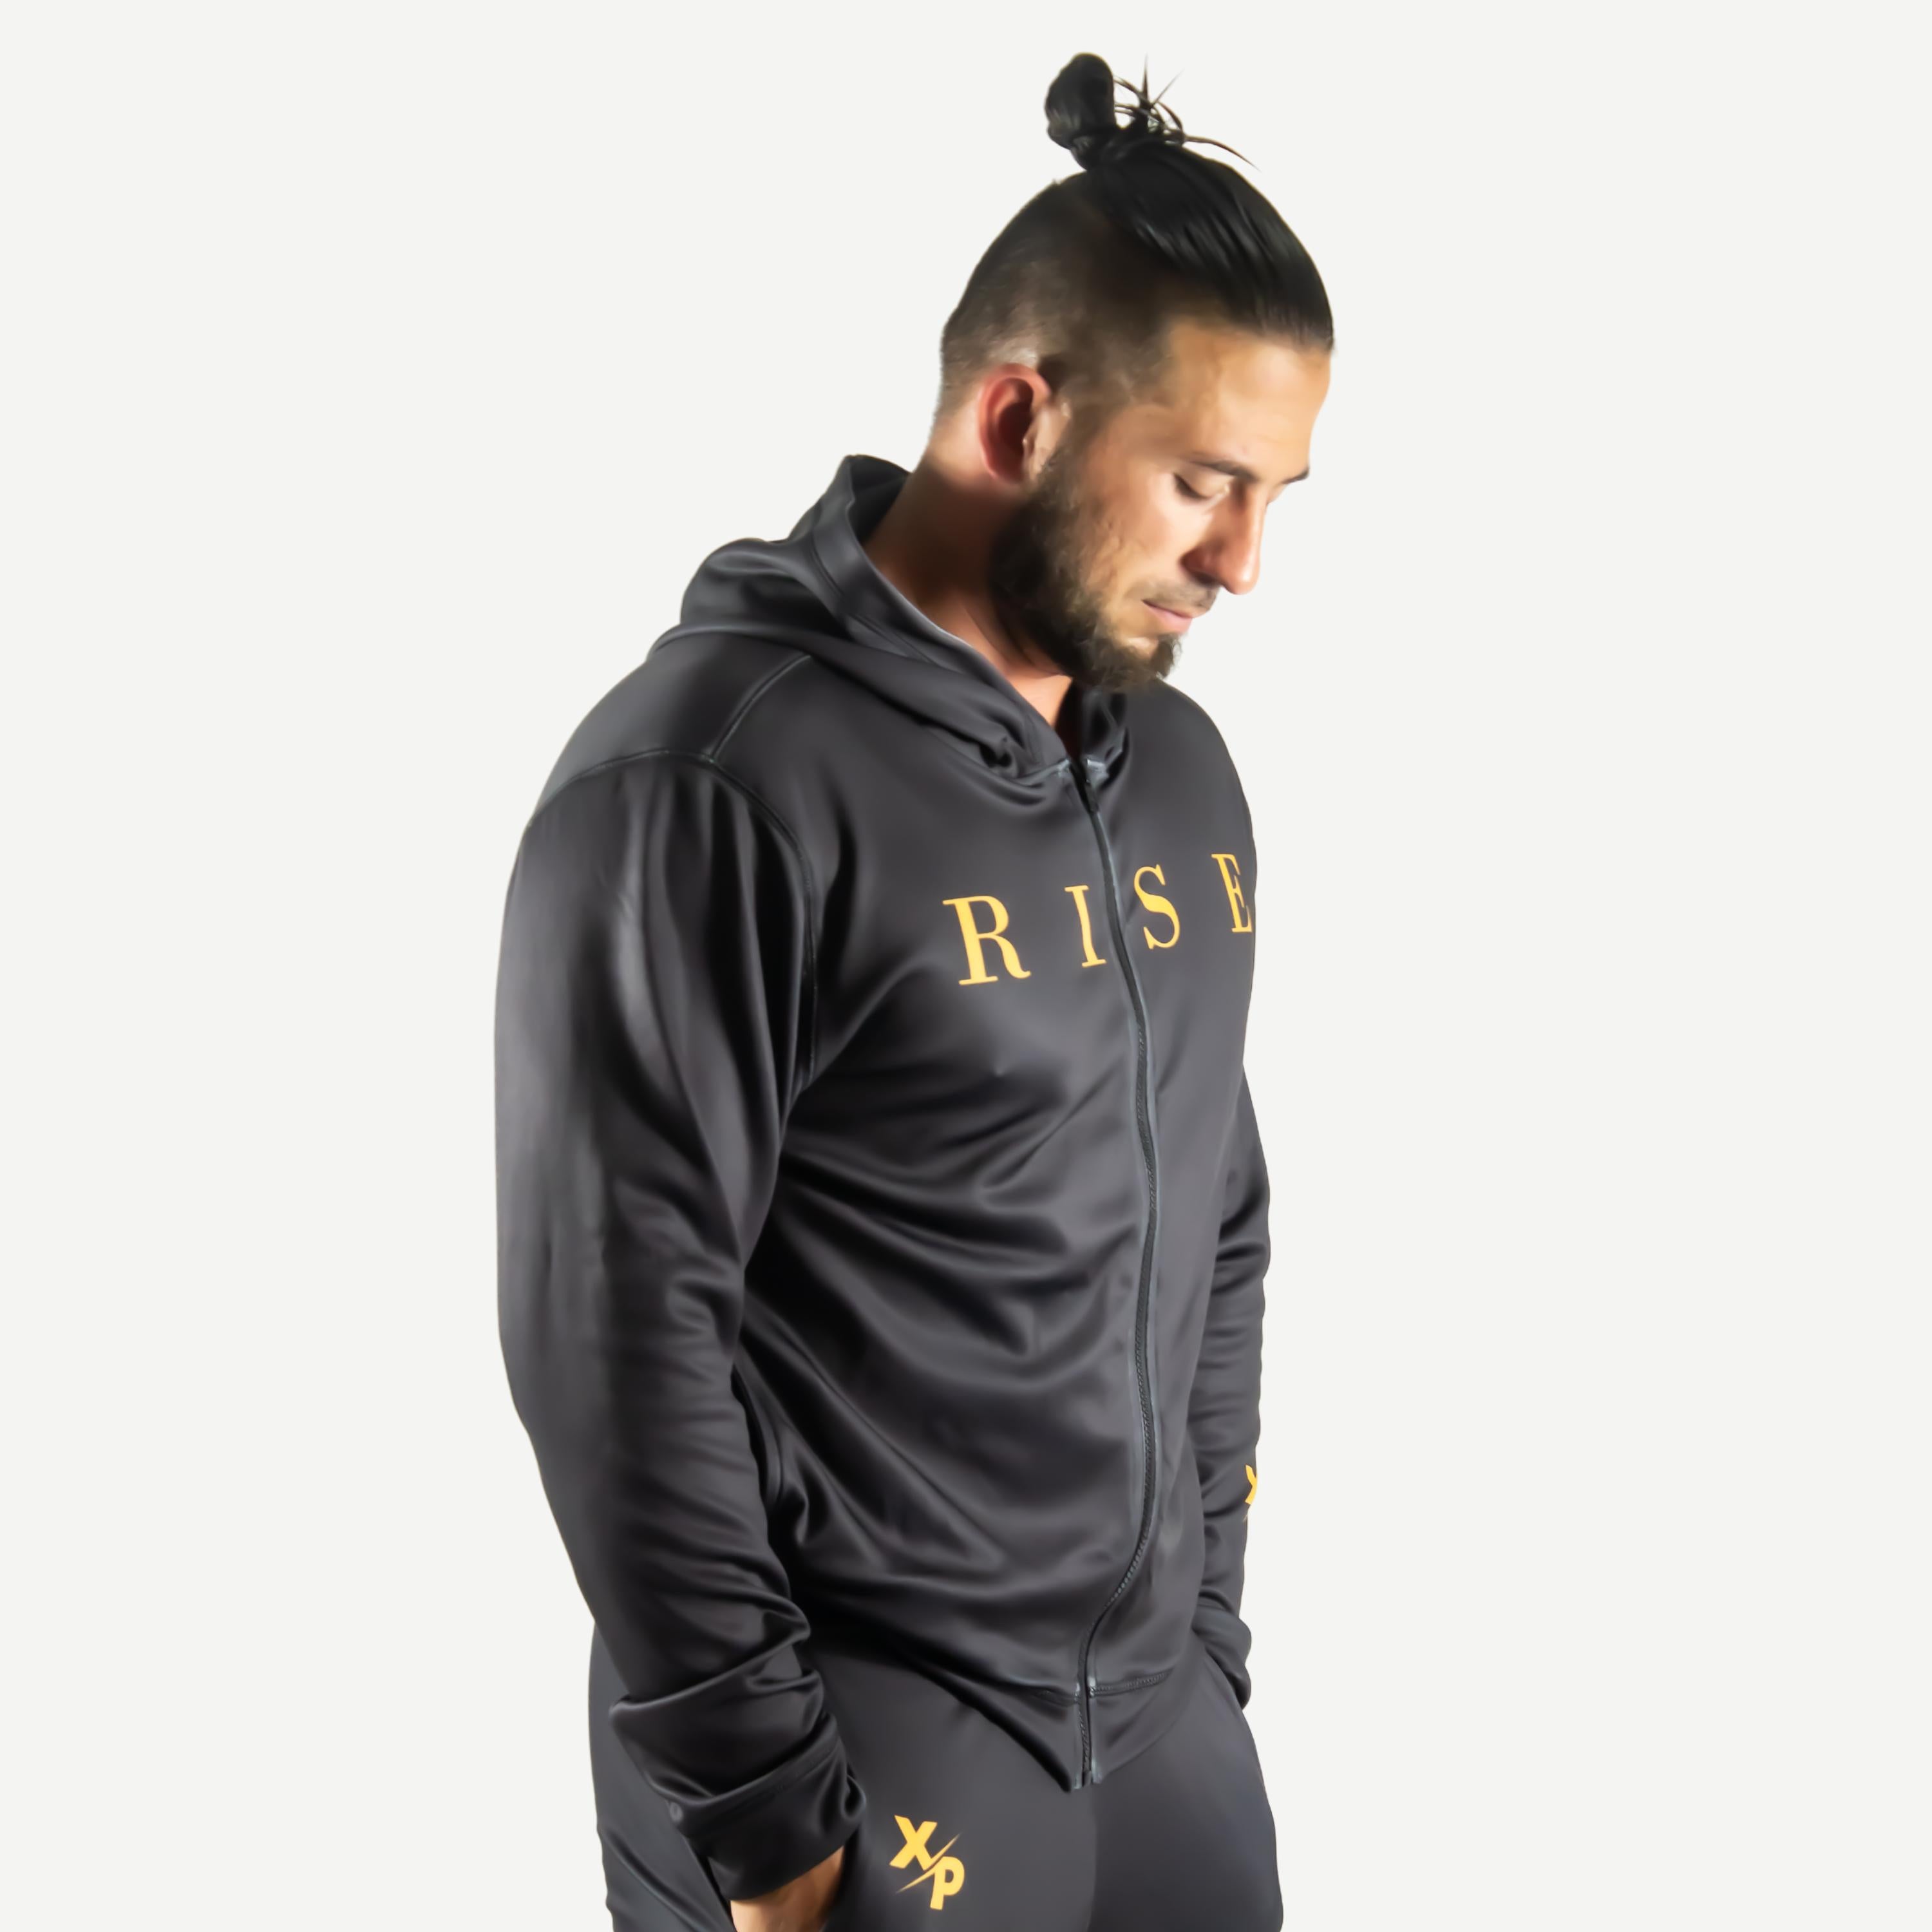 Rise Full Zip Jacket  in Black- Gold Xtreme Pro Apparel